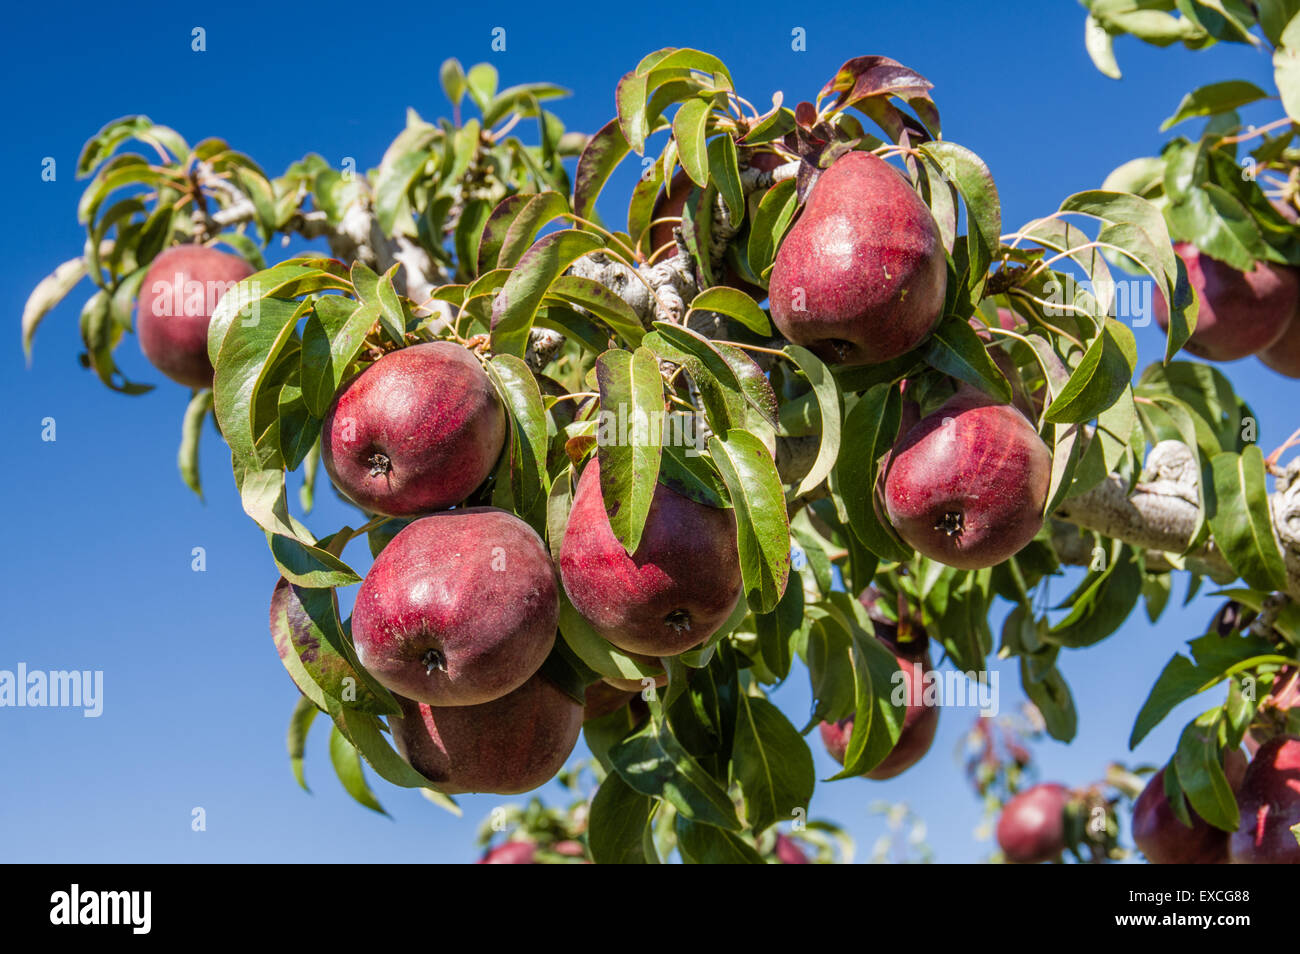 Group of red pears on the tree in a pear orchard Stock Photo